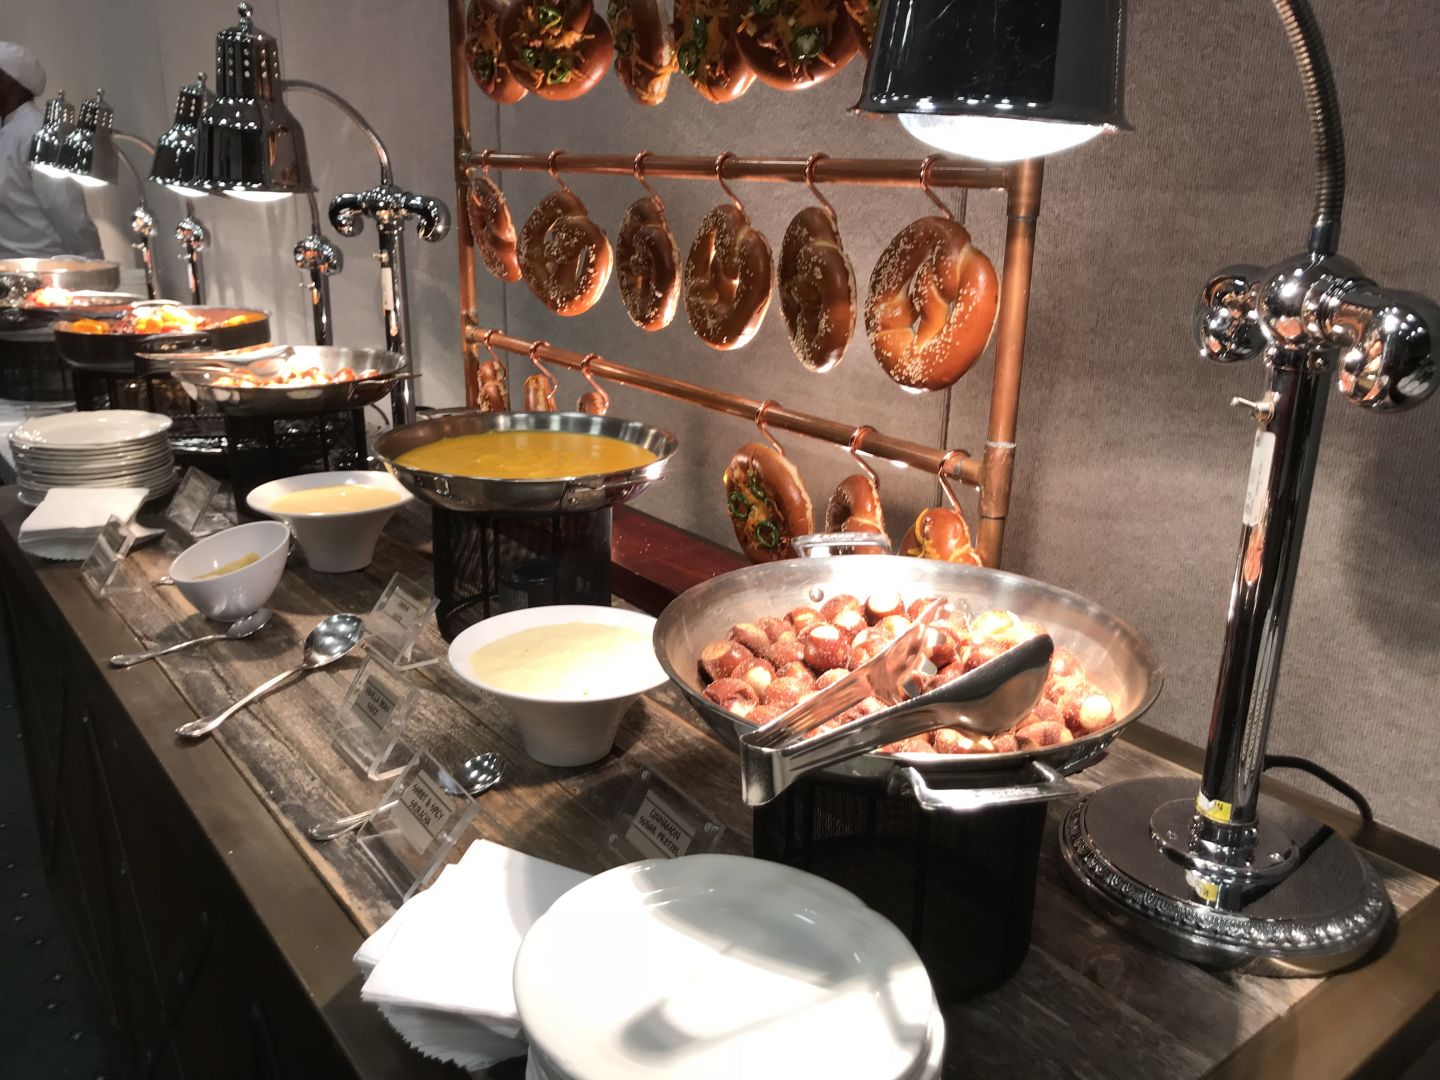 An artisanal pretzel bar was just one of the many mouthwatering dishes sampled at the the news conference announcing the 2018 Gala